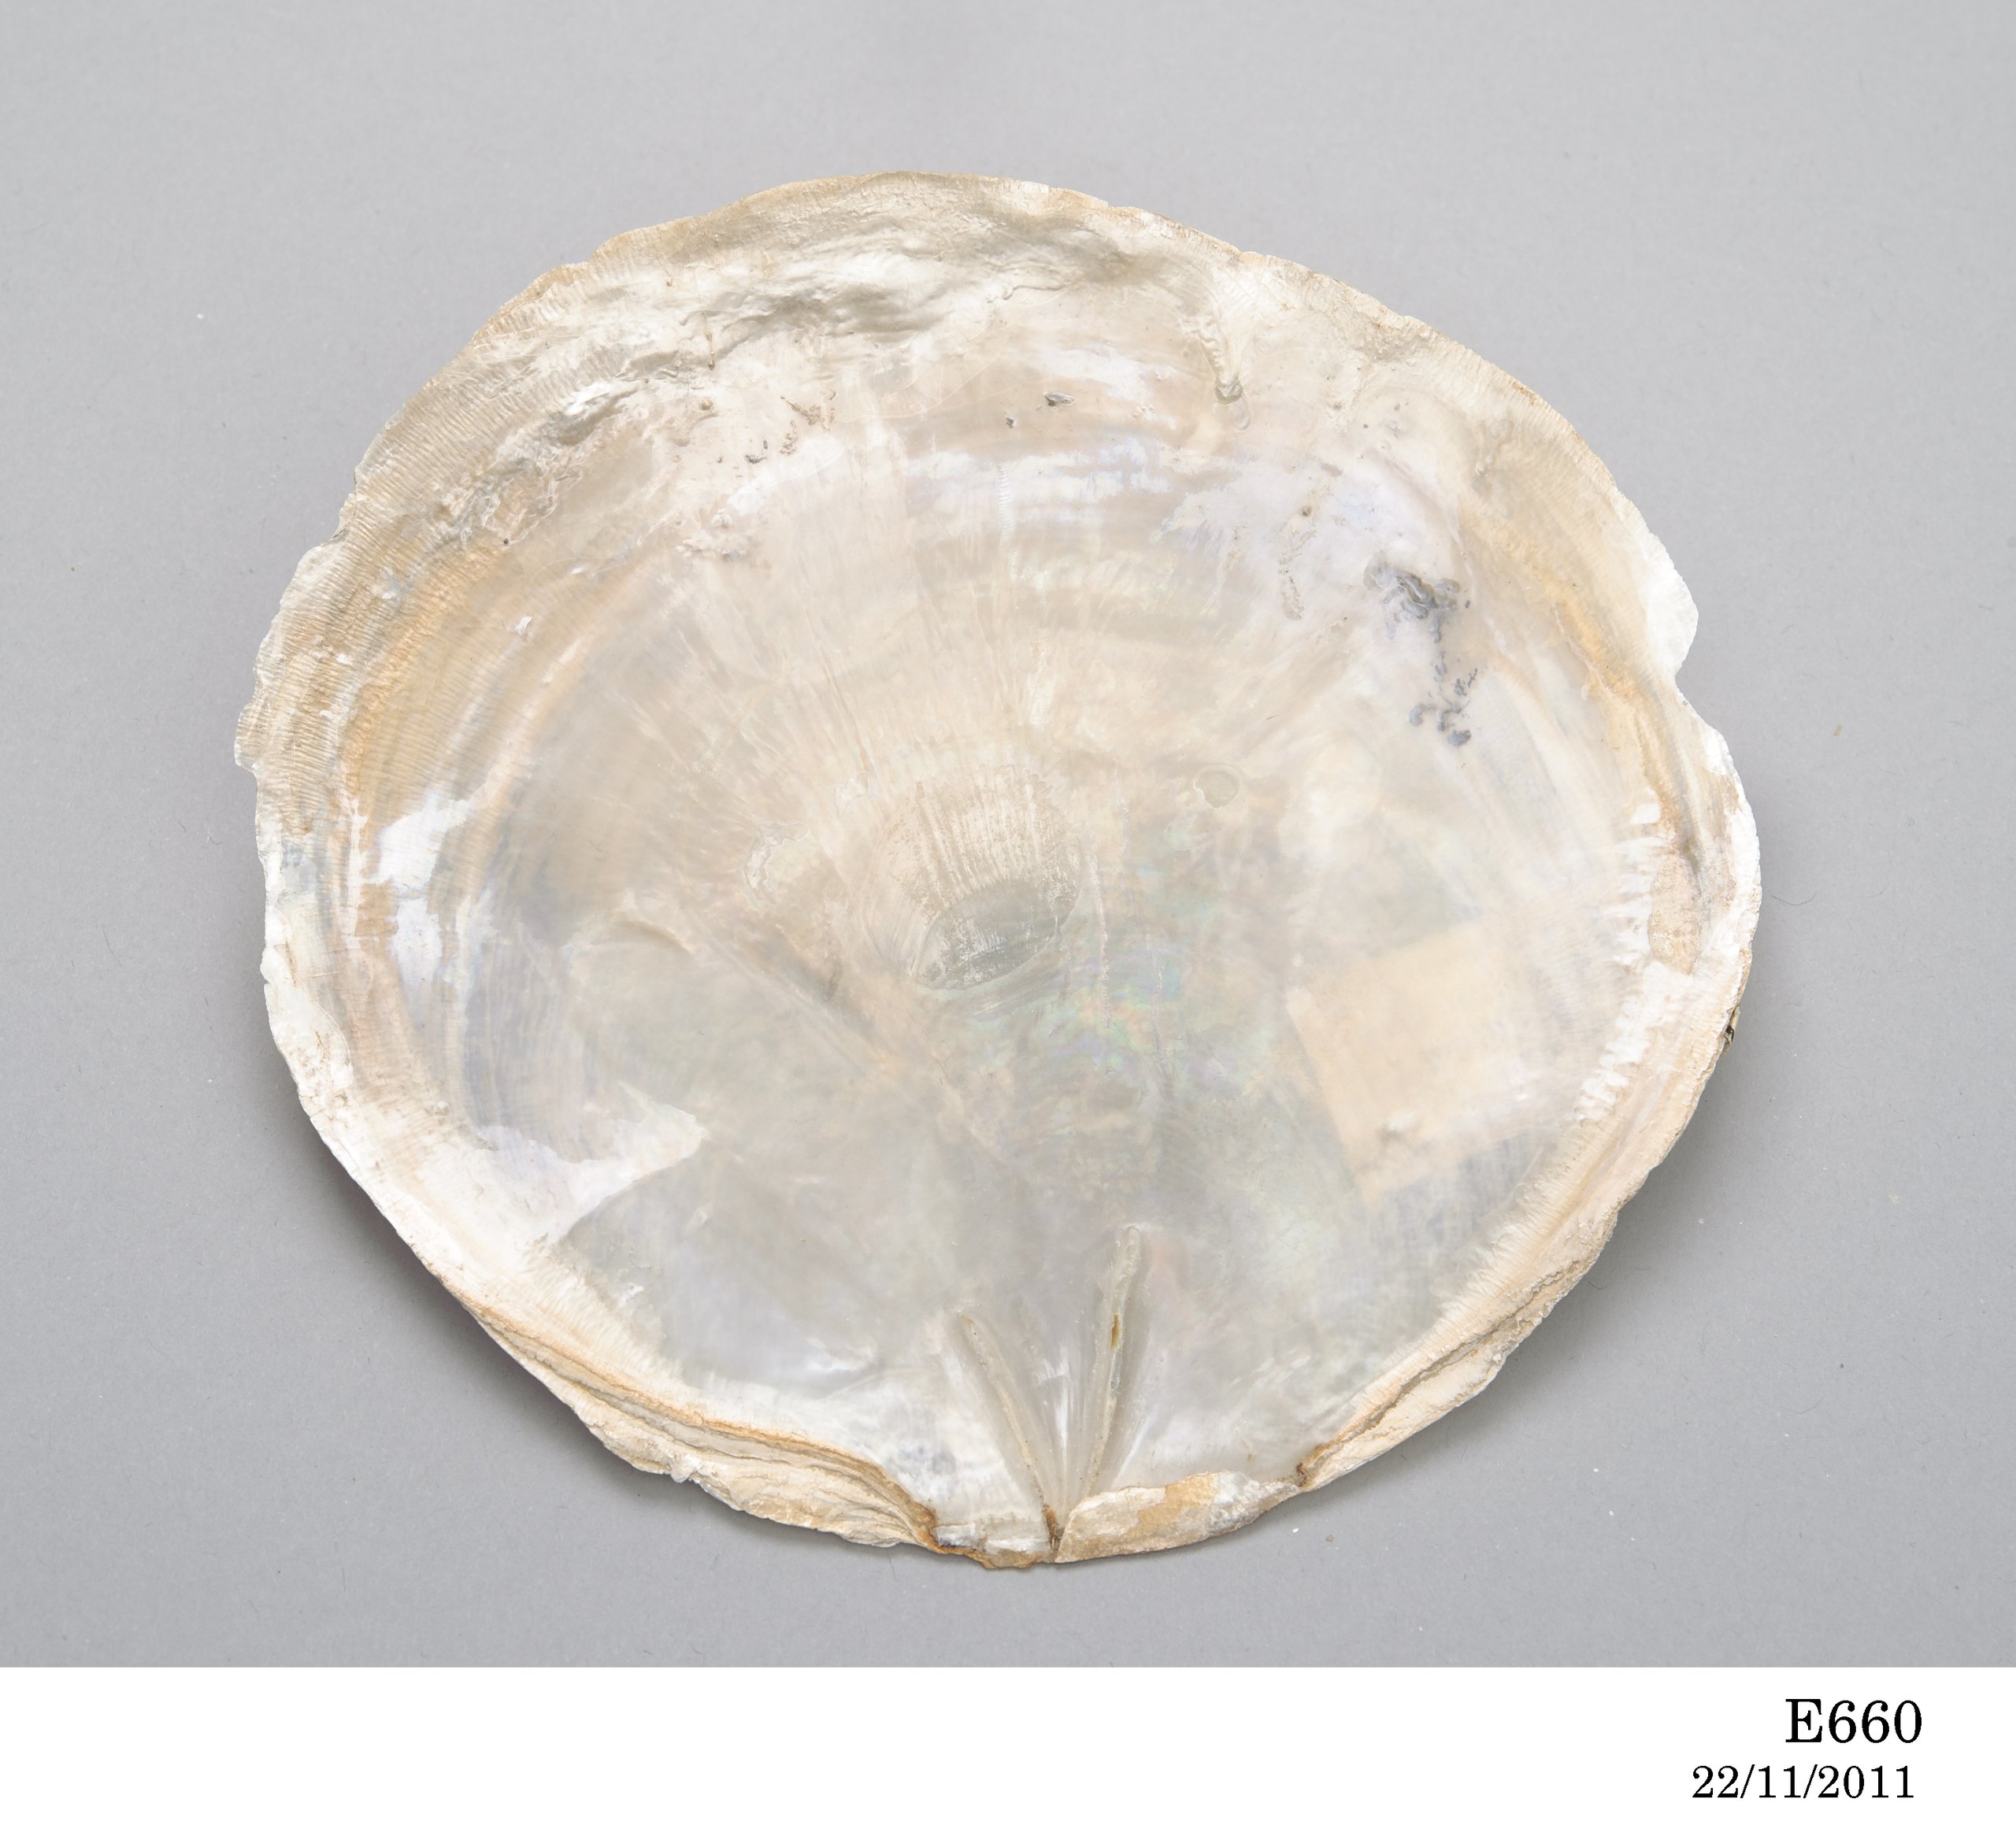 Placuna placenta (Windowpane oyster) shell from Singapore collected by Julian Tennison-Woods